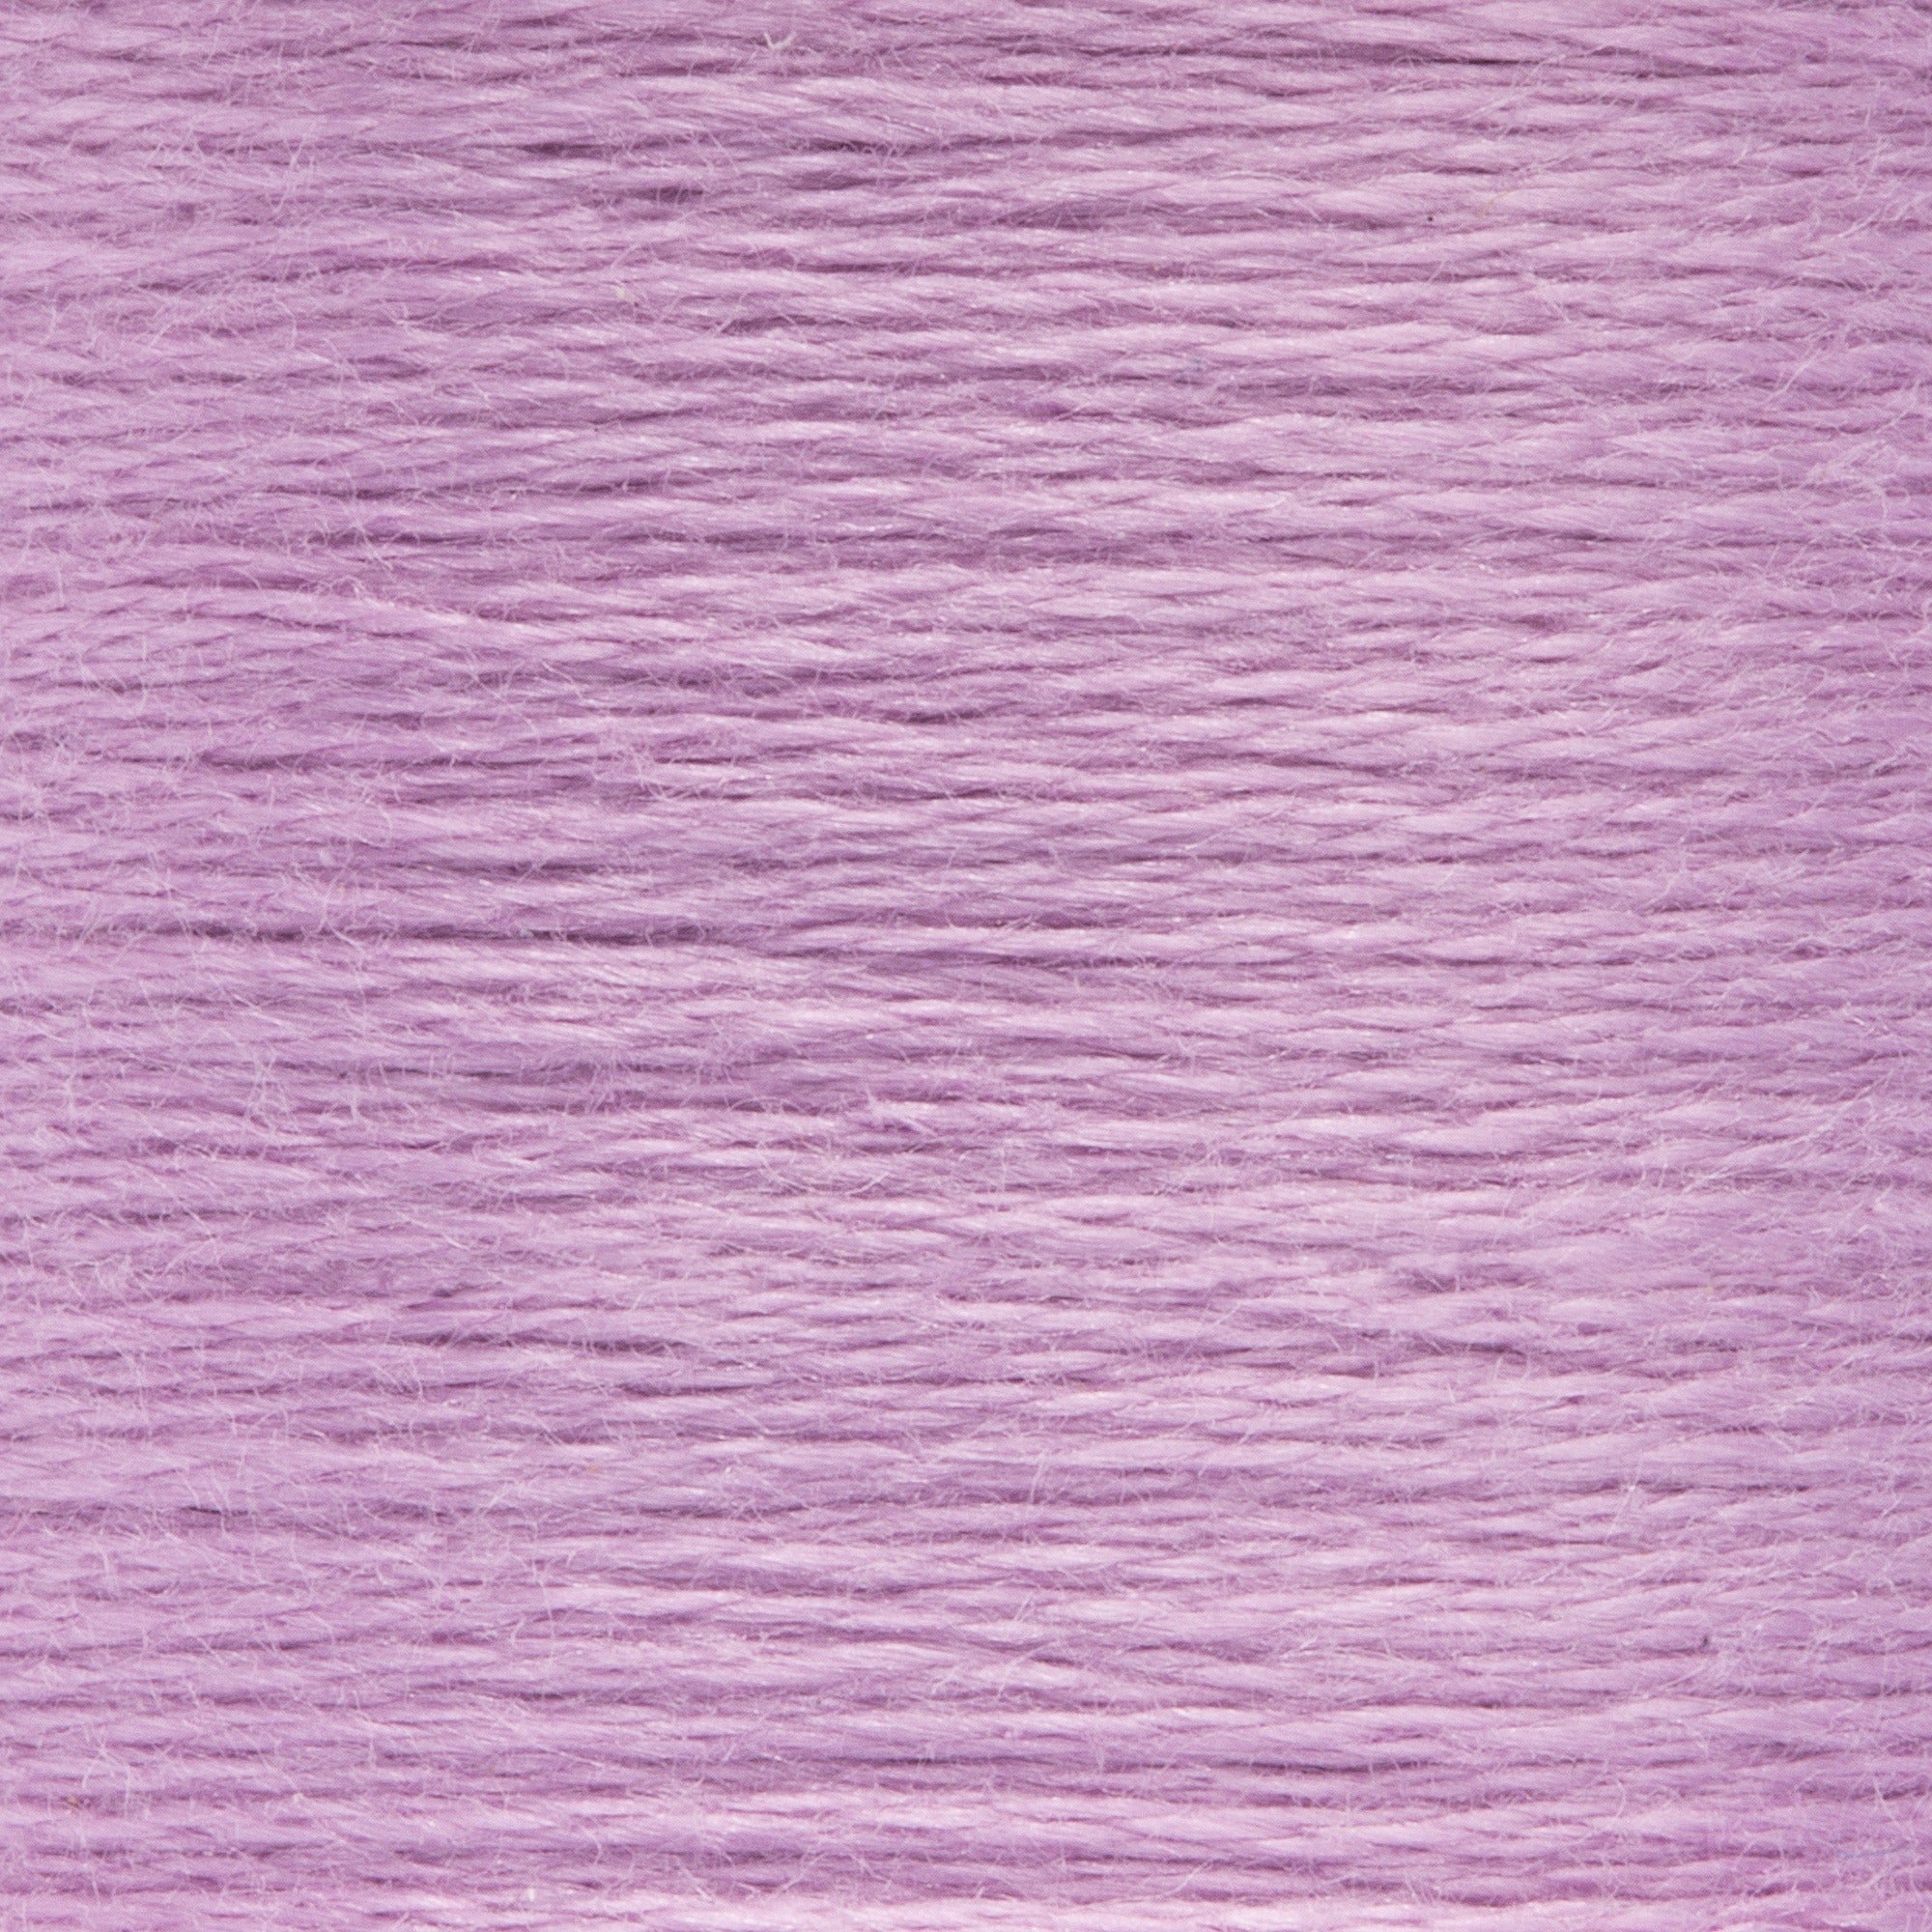 Anchor Embroidery Floss in Plum Lt